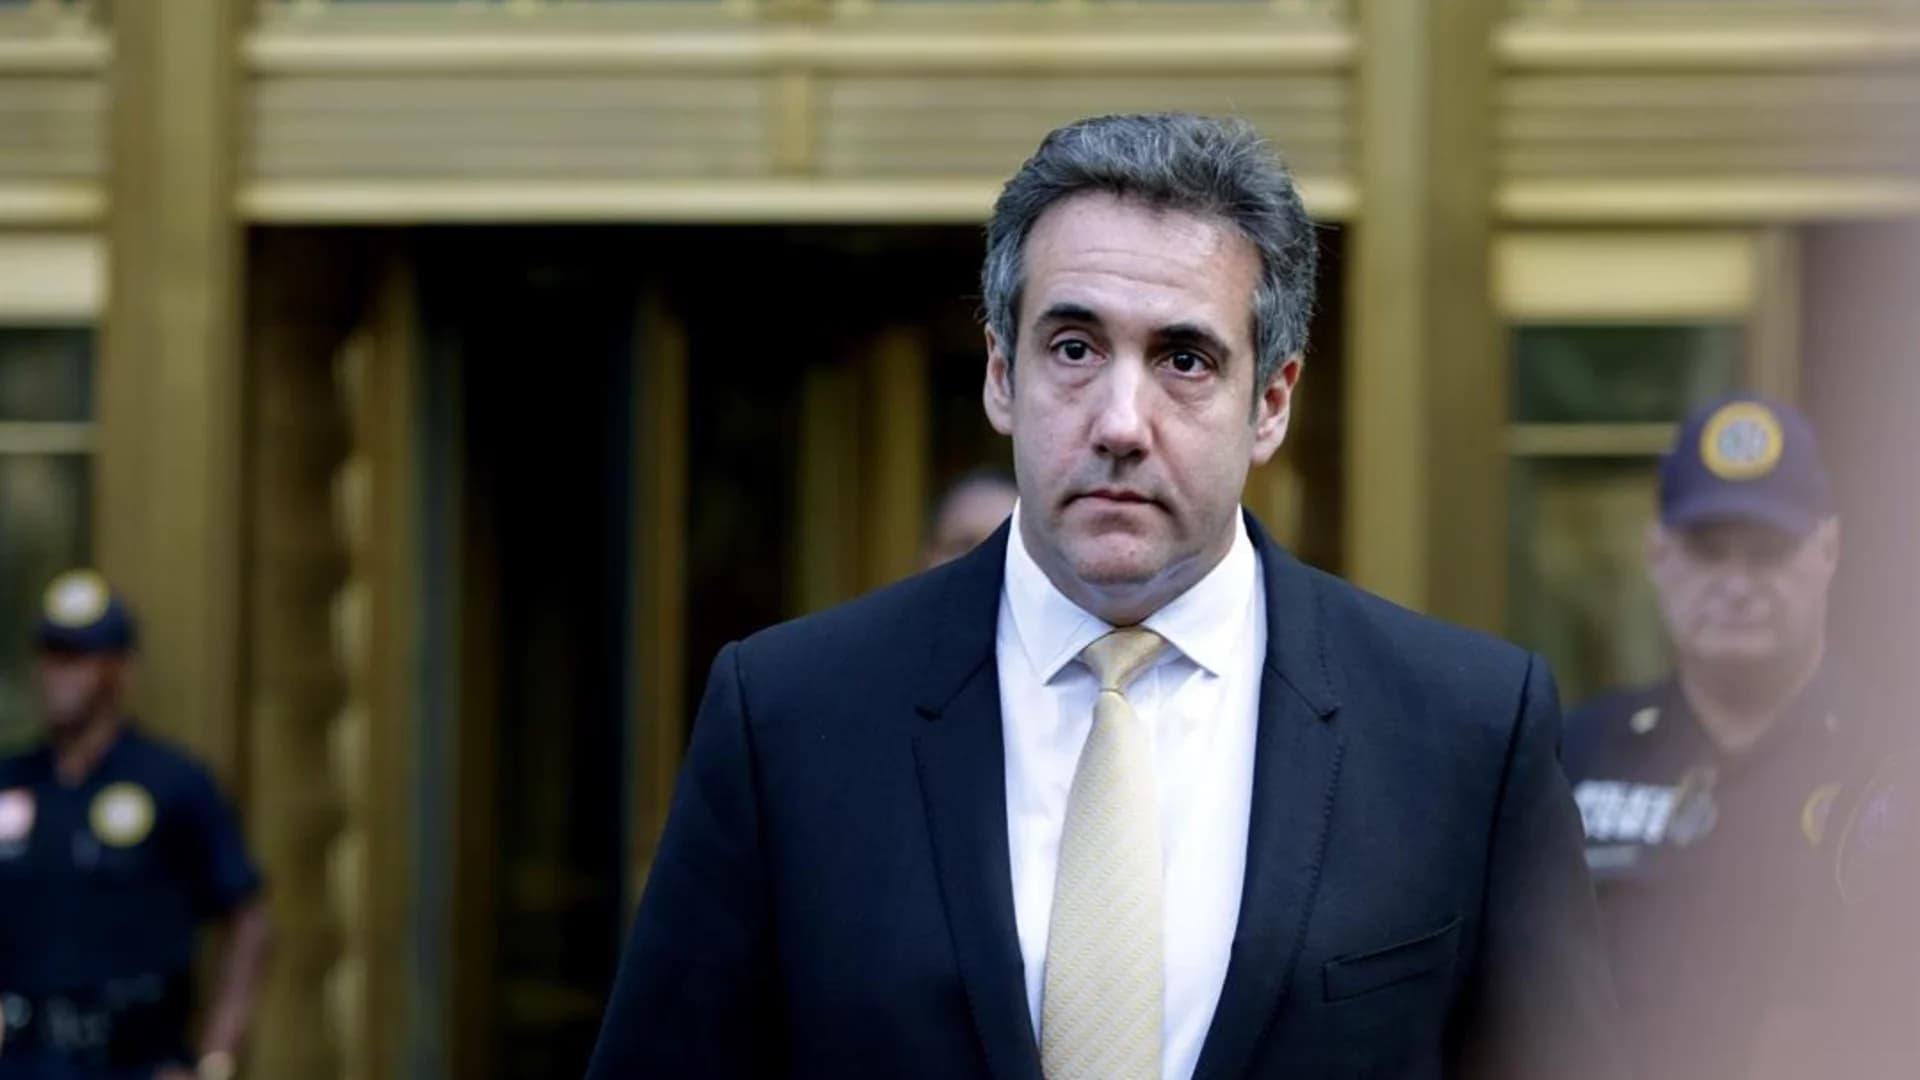 Special counsel: Ex-Trump lawyer Cohen met Russian offering 'political synergy'